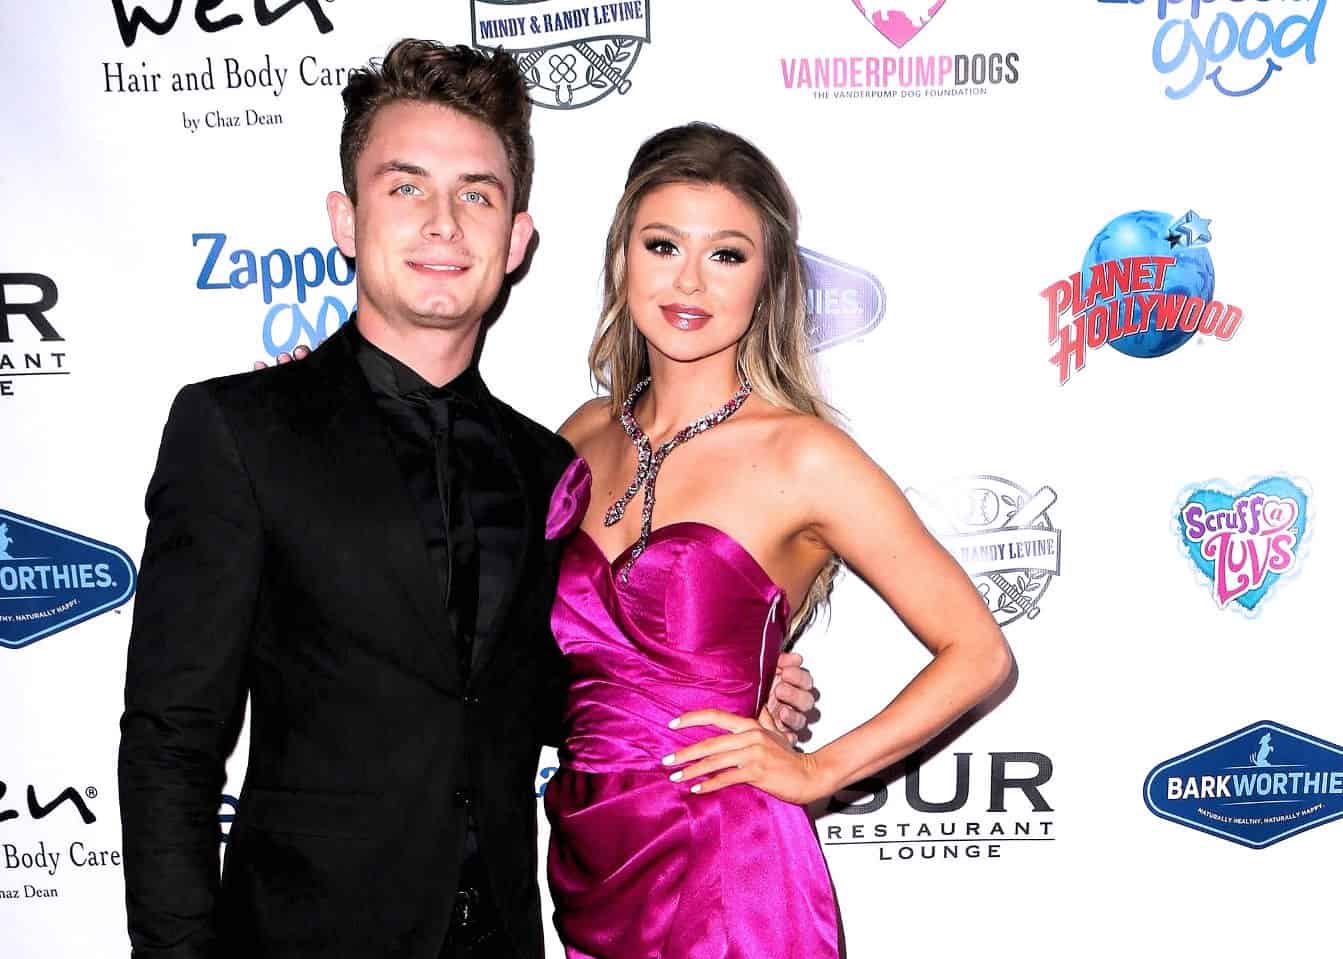 Vanderpump Rules Star Raquel Leviss Reveals How a One Night Stand With James Kennedy Turned Into a Relationship, Dishes on How They Met and if Marriage is in the Works